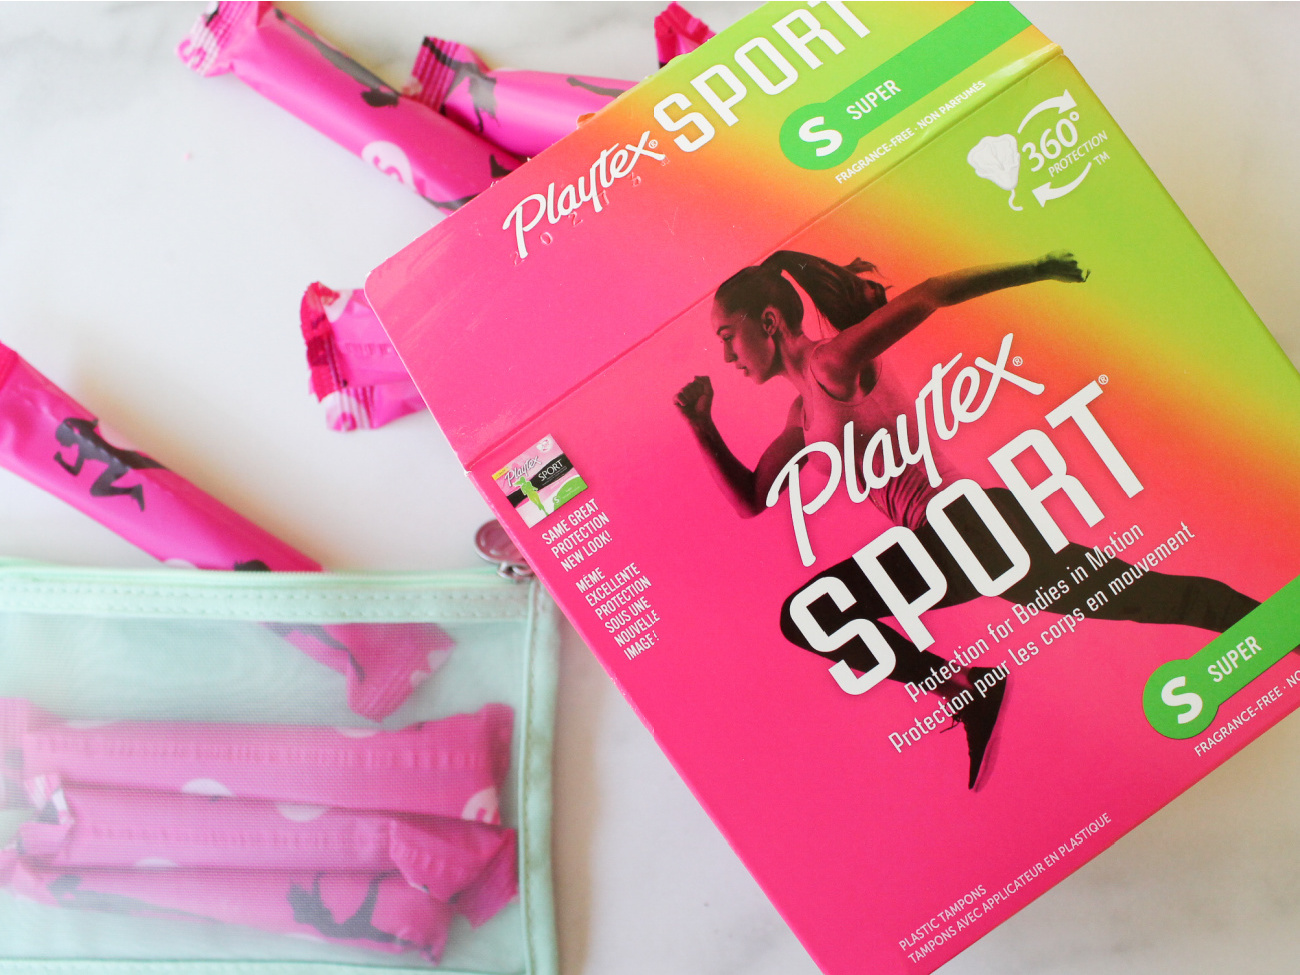 Playtex Sport Tampons Coupon To Print – Save $4 - iHeartKroger